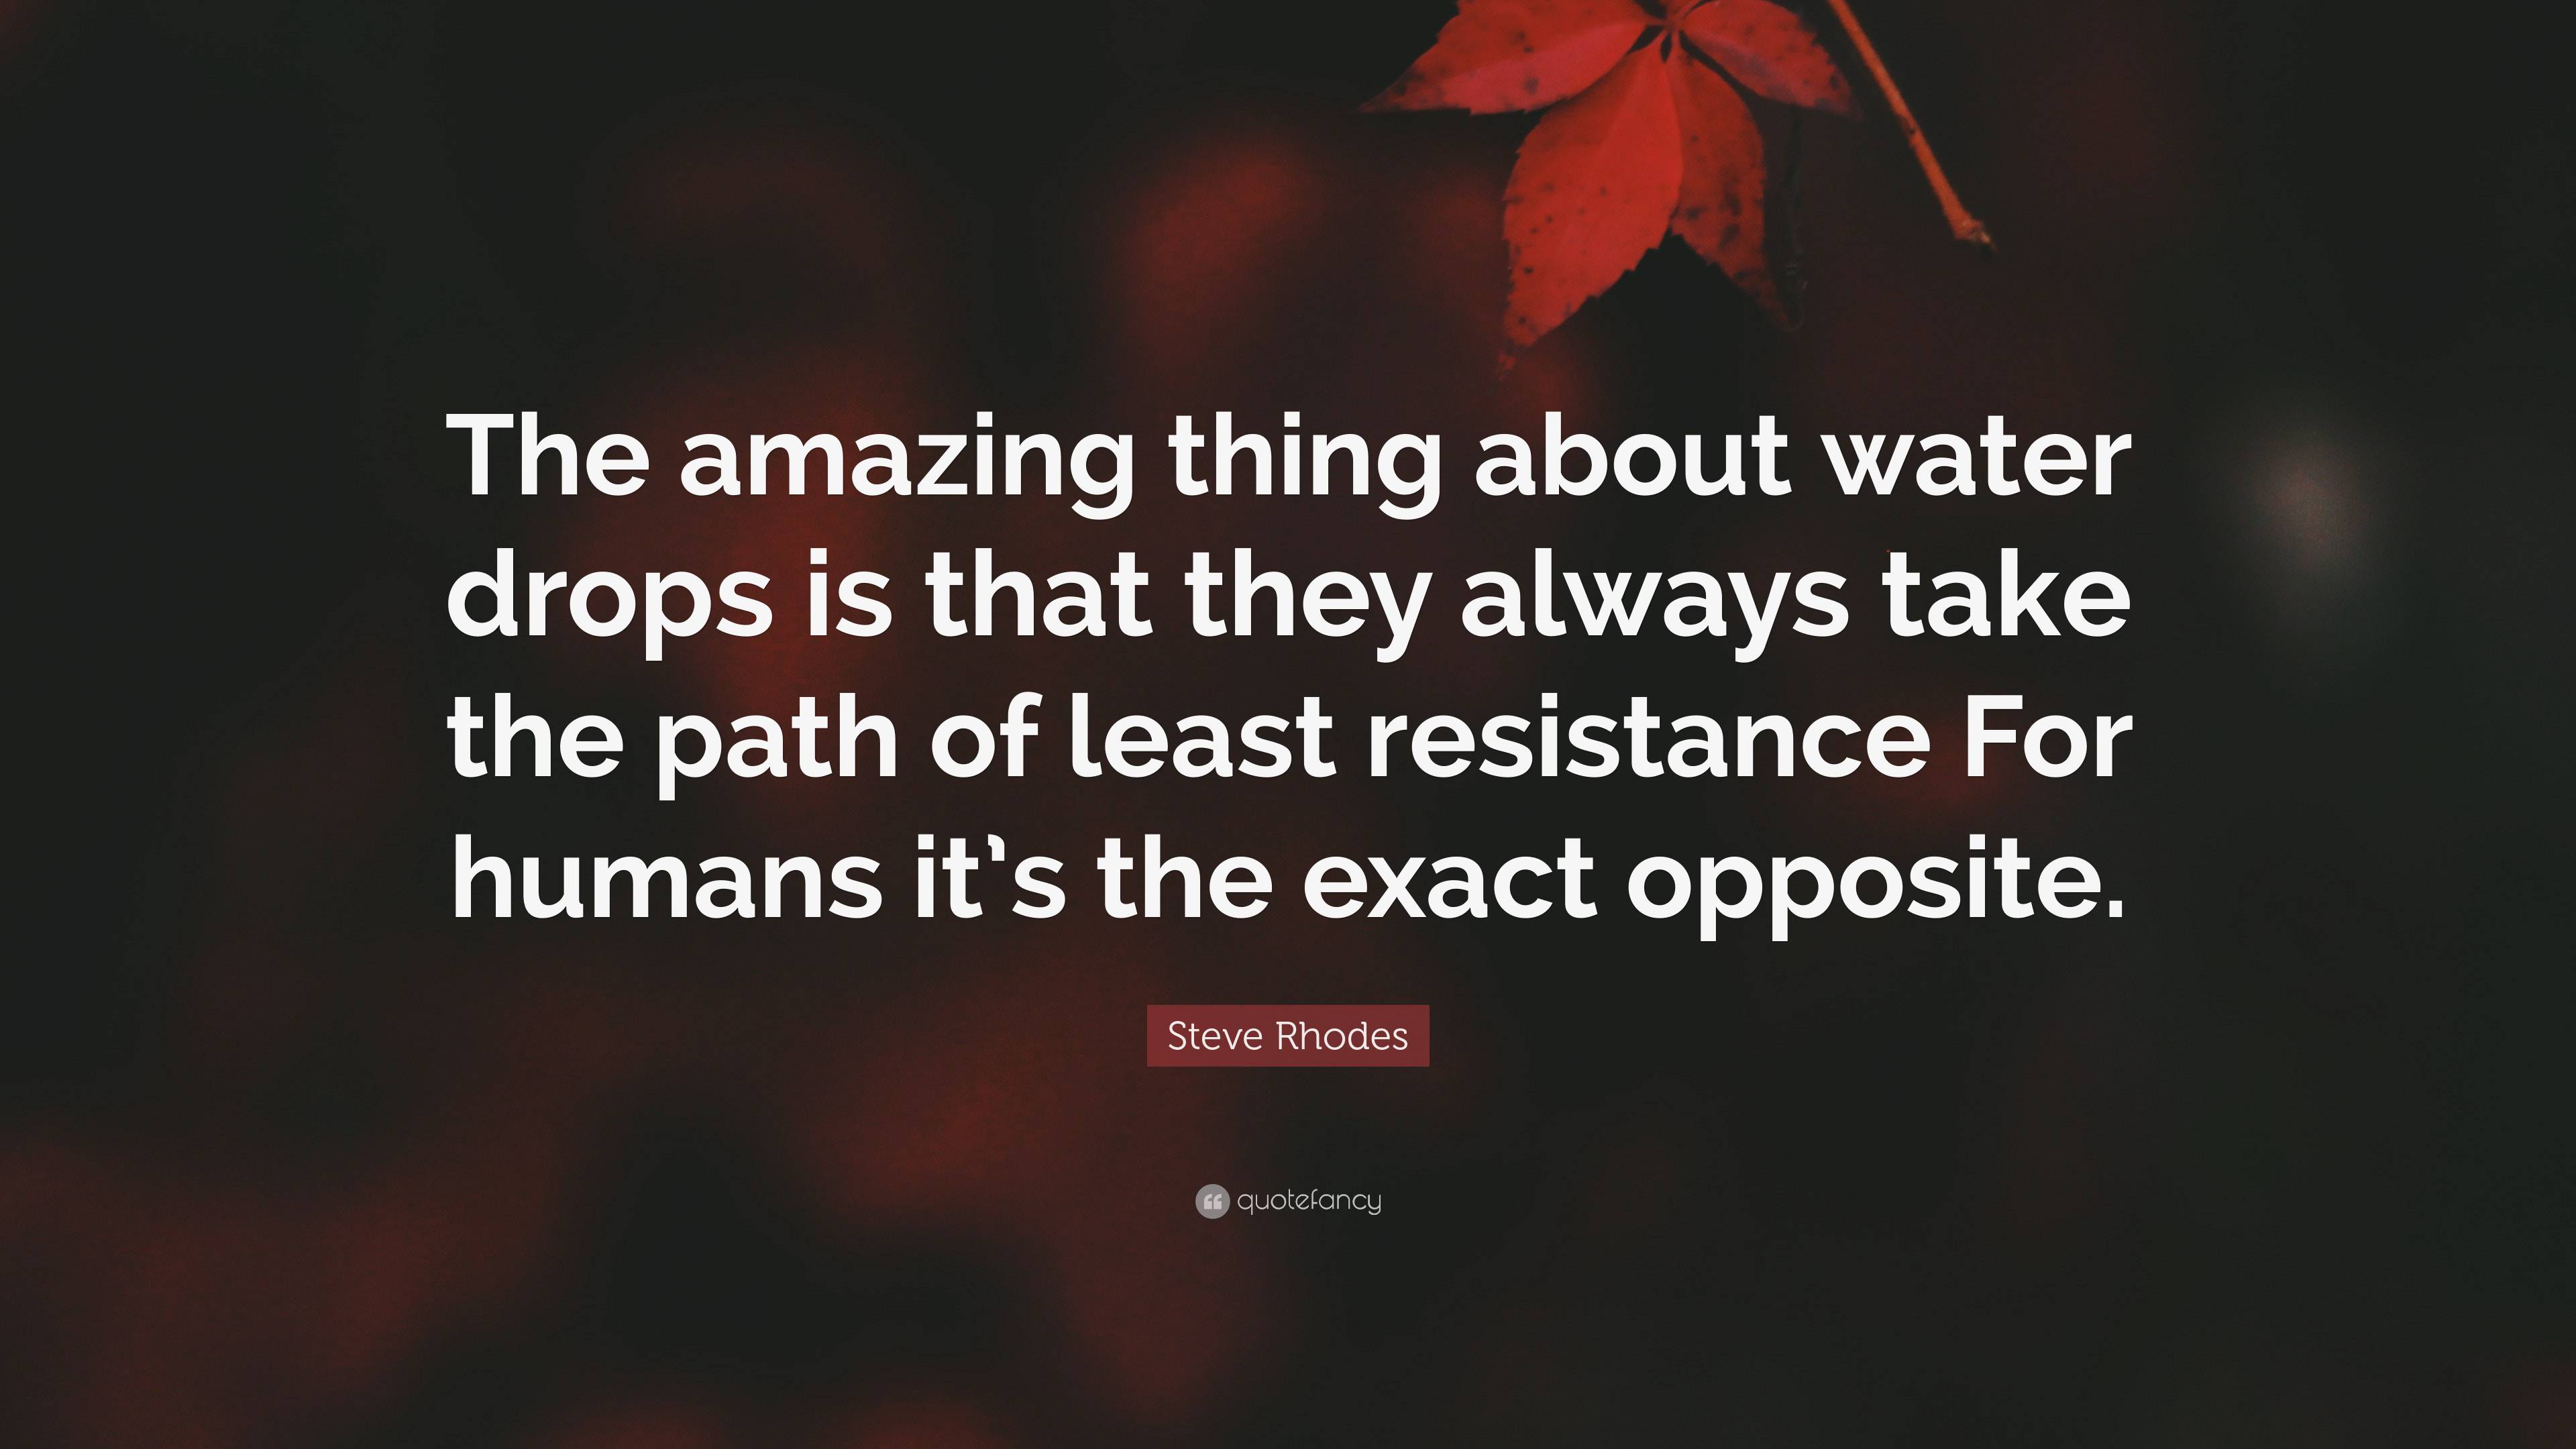 Steve Rhodes Quote: “The amazing thing about water drops is that they always  take the path of least resistance For humans it's the exact oppo”